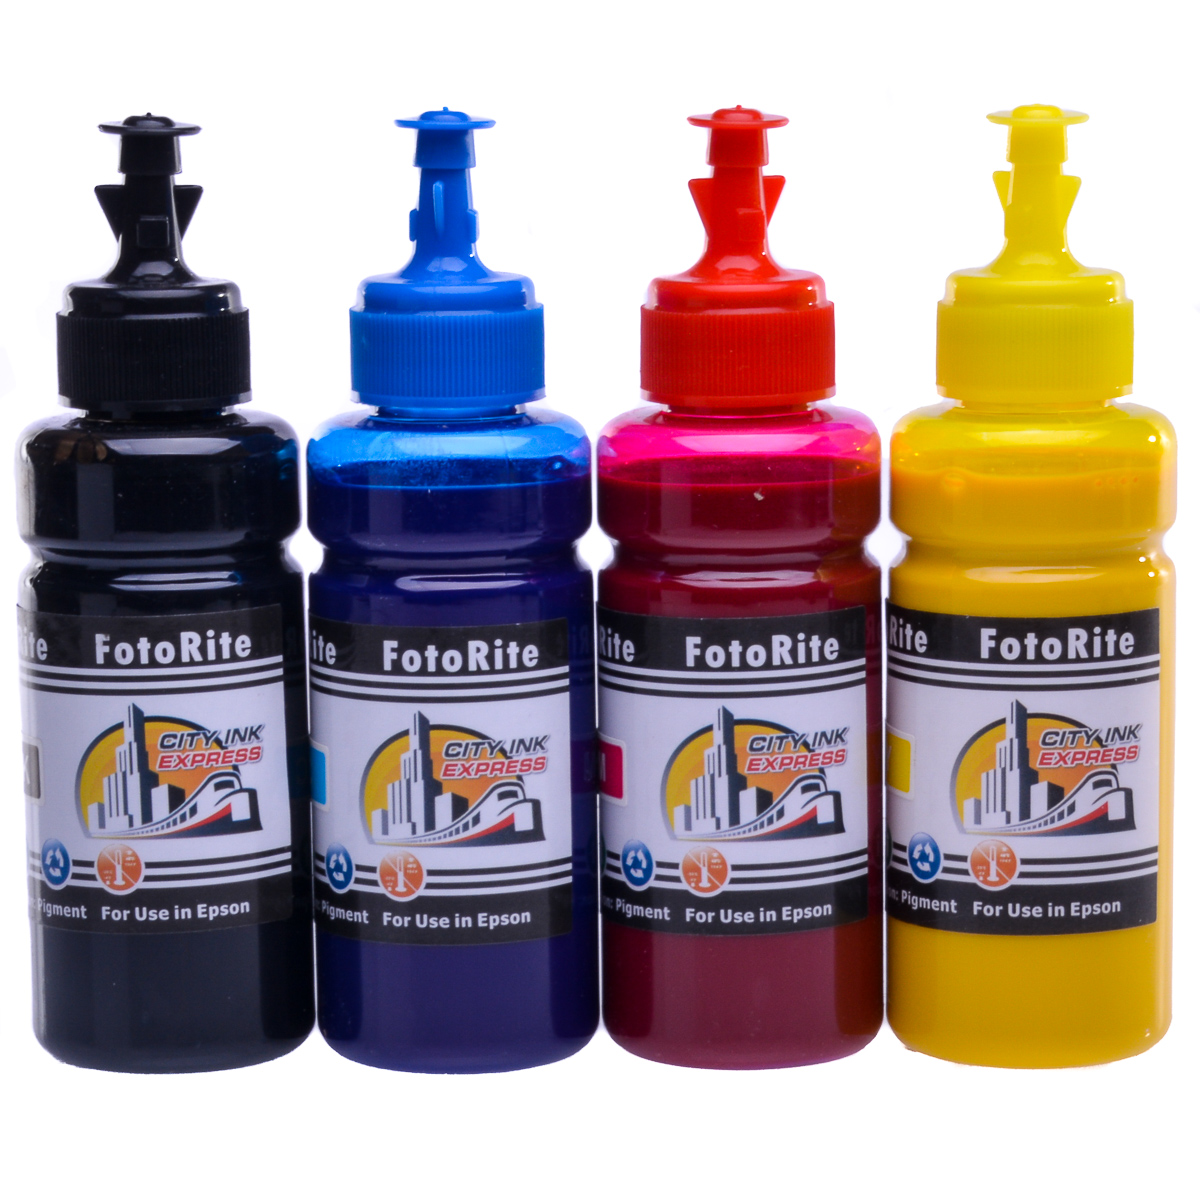 Cheap Multipack pigment ink refill replaces Epson WF-2830DWF